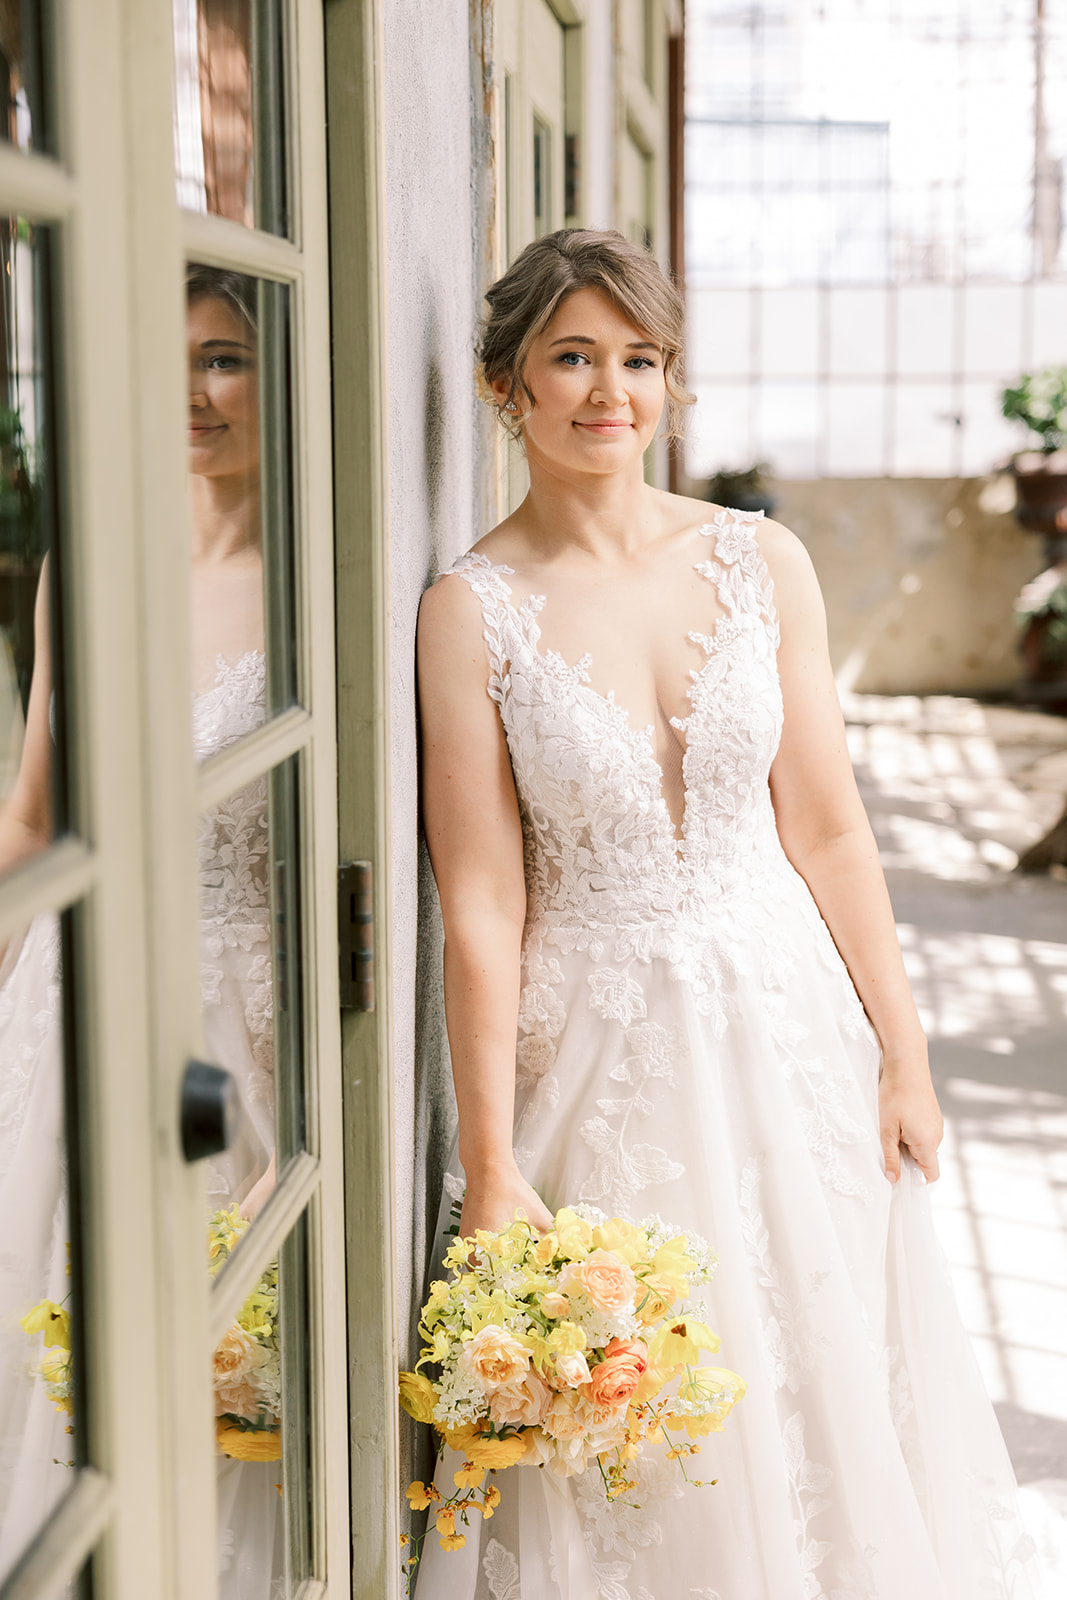 bride leans against wall holding a yellow and orange bouquet